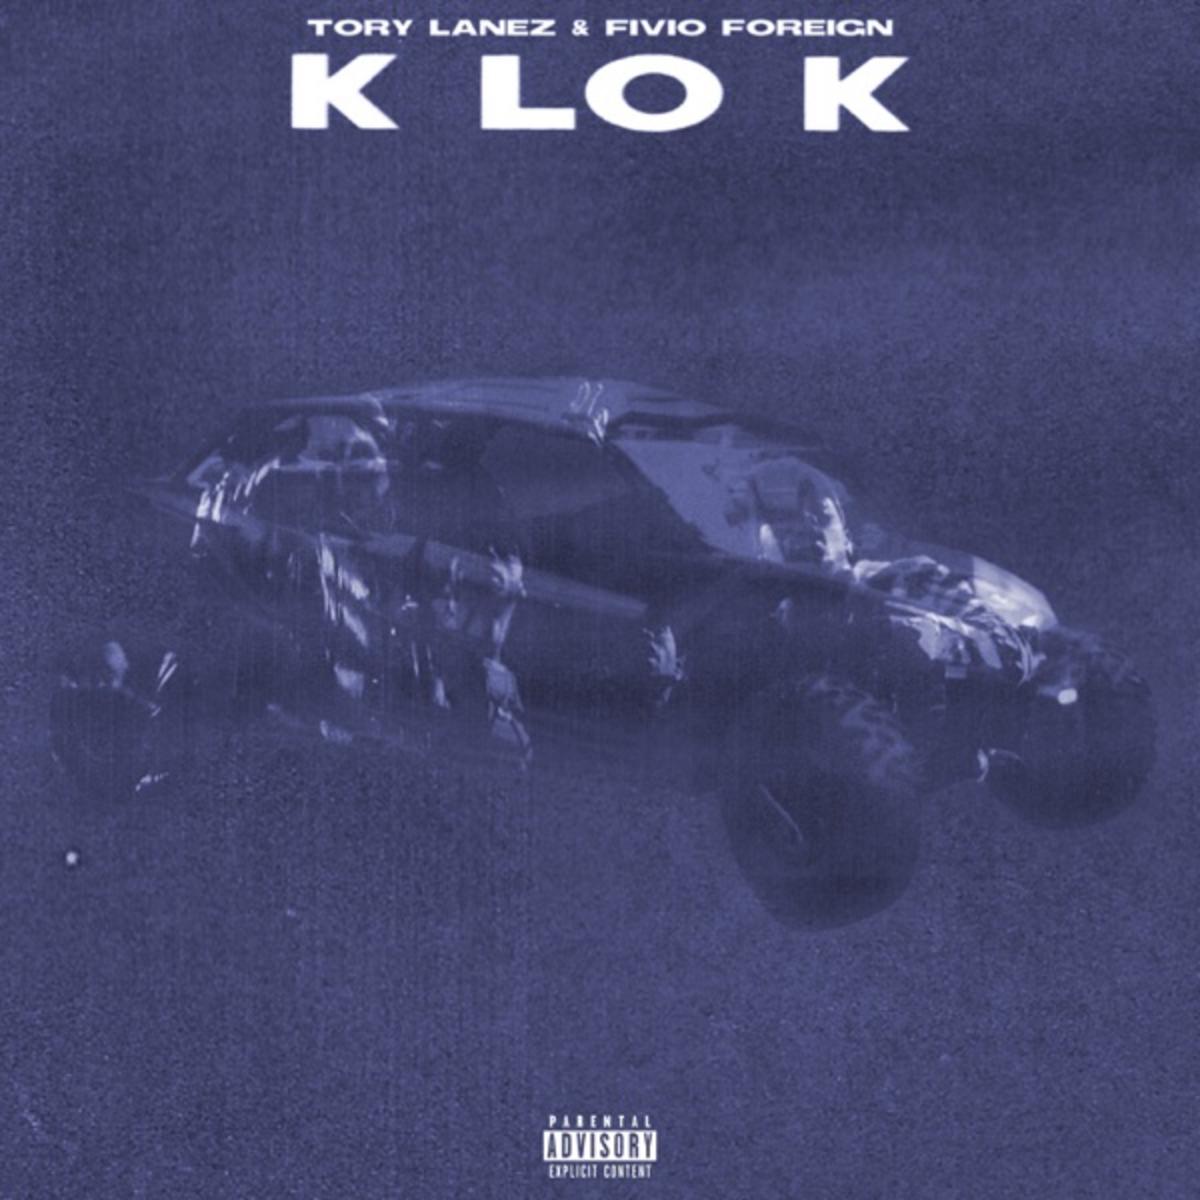 Tory Lanez Links Up With Fivio Foreign for 'K LO K'